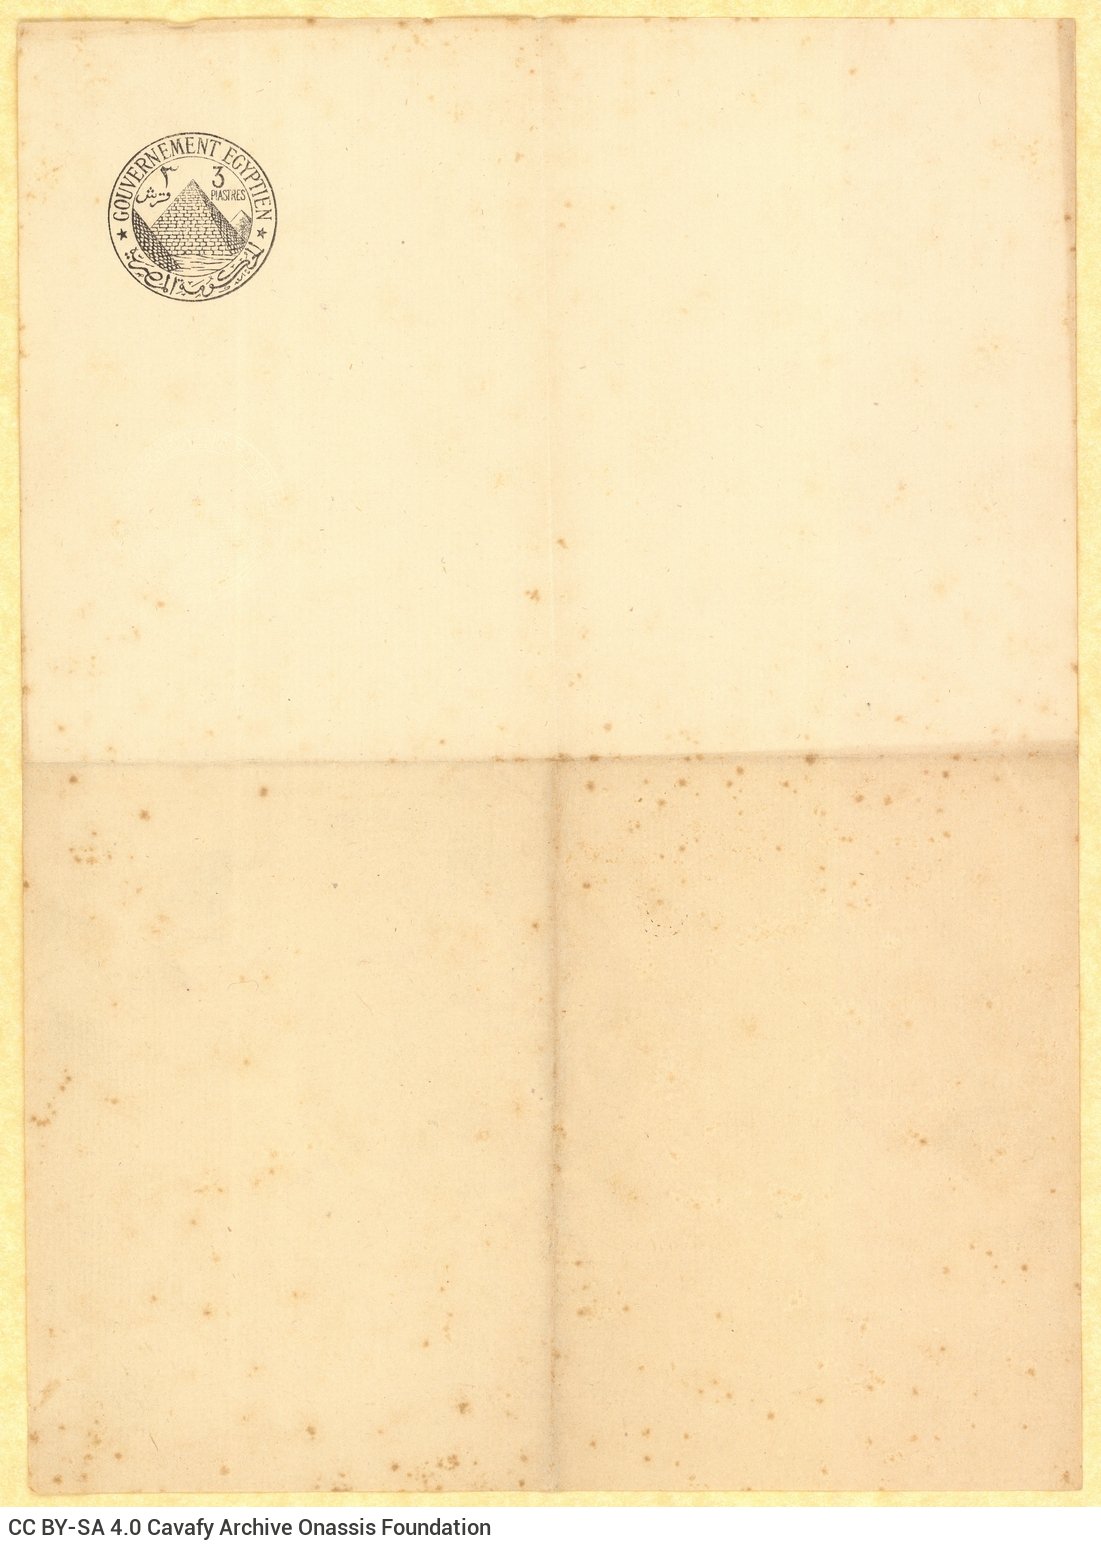 Four-page letterhead with the embossed printed logo of the Egyptian government on the first page.